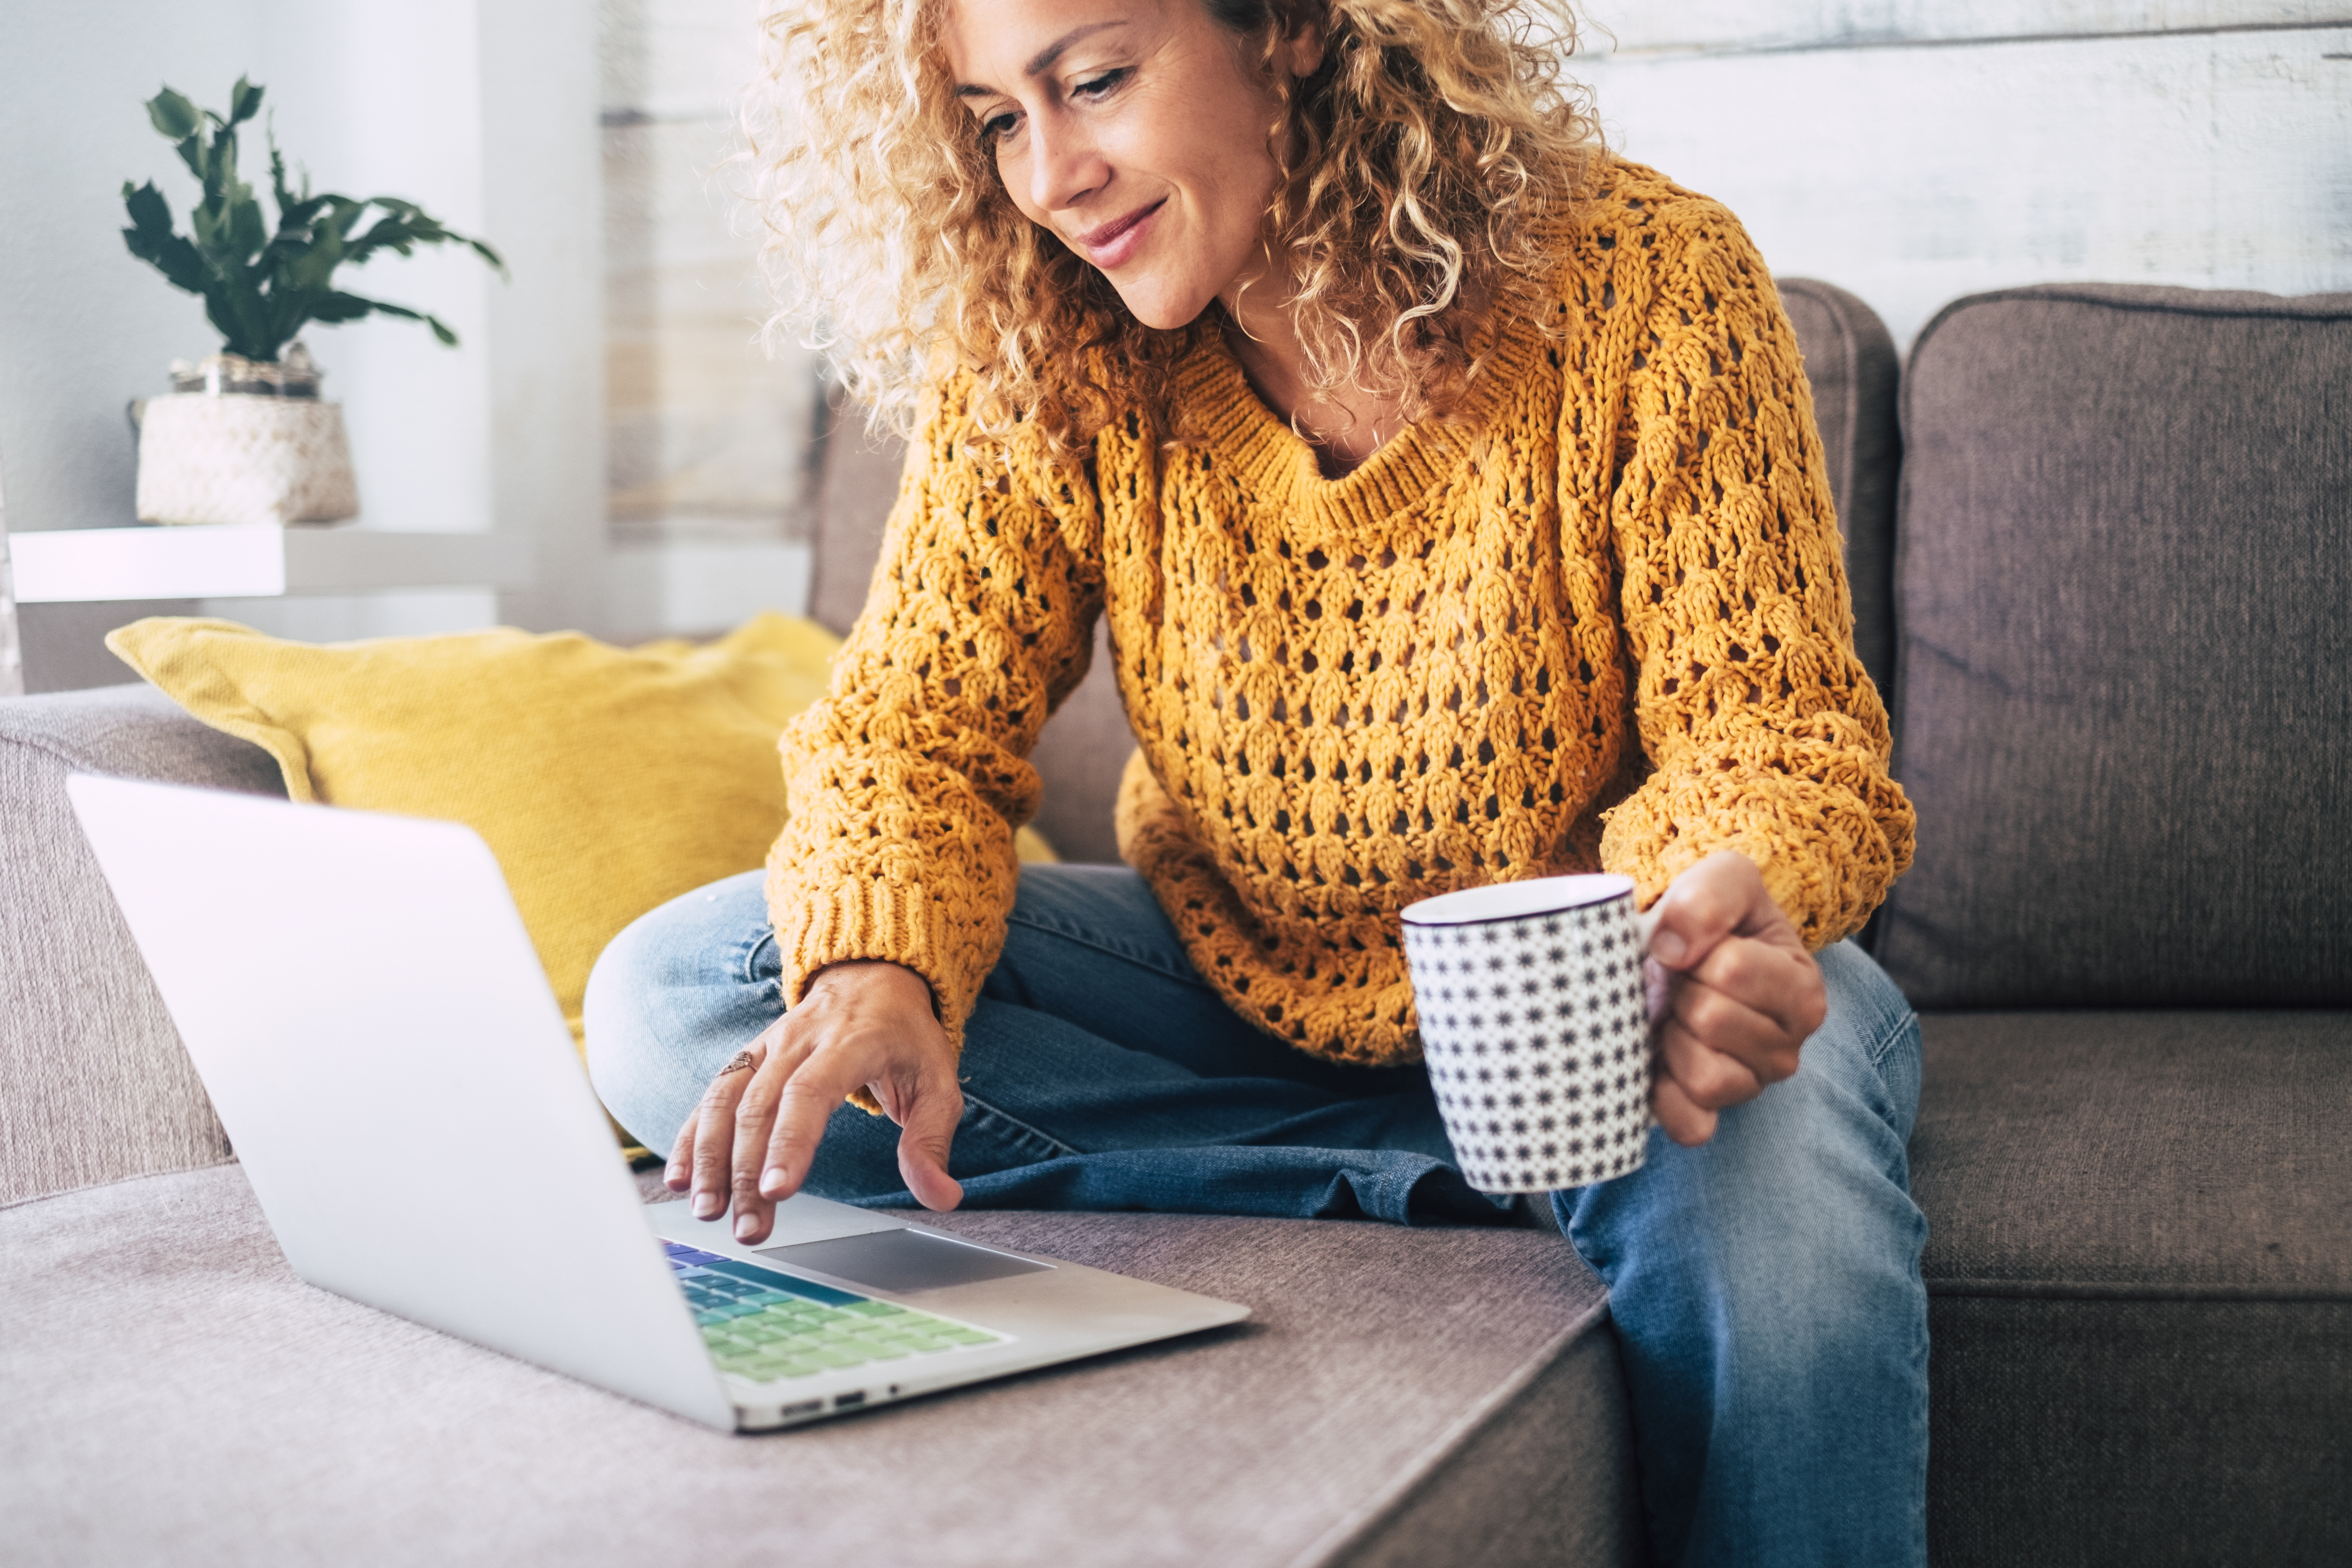 A curly-haired woman in a yellow sweater holding a coffee mug and looking at a laptop.